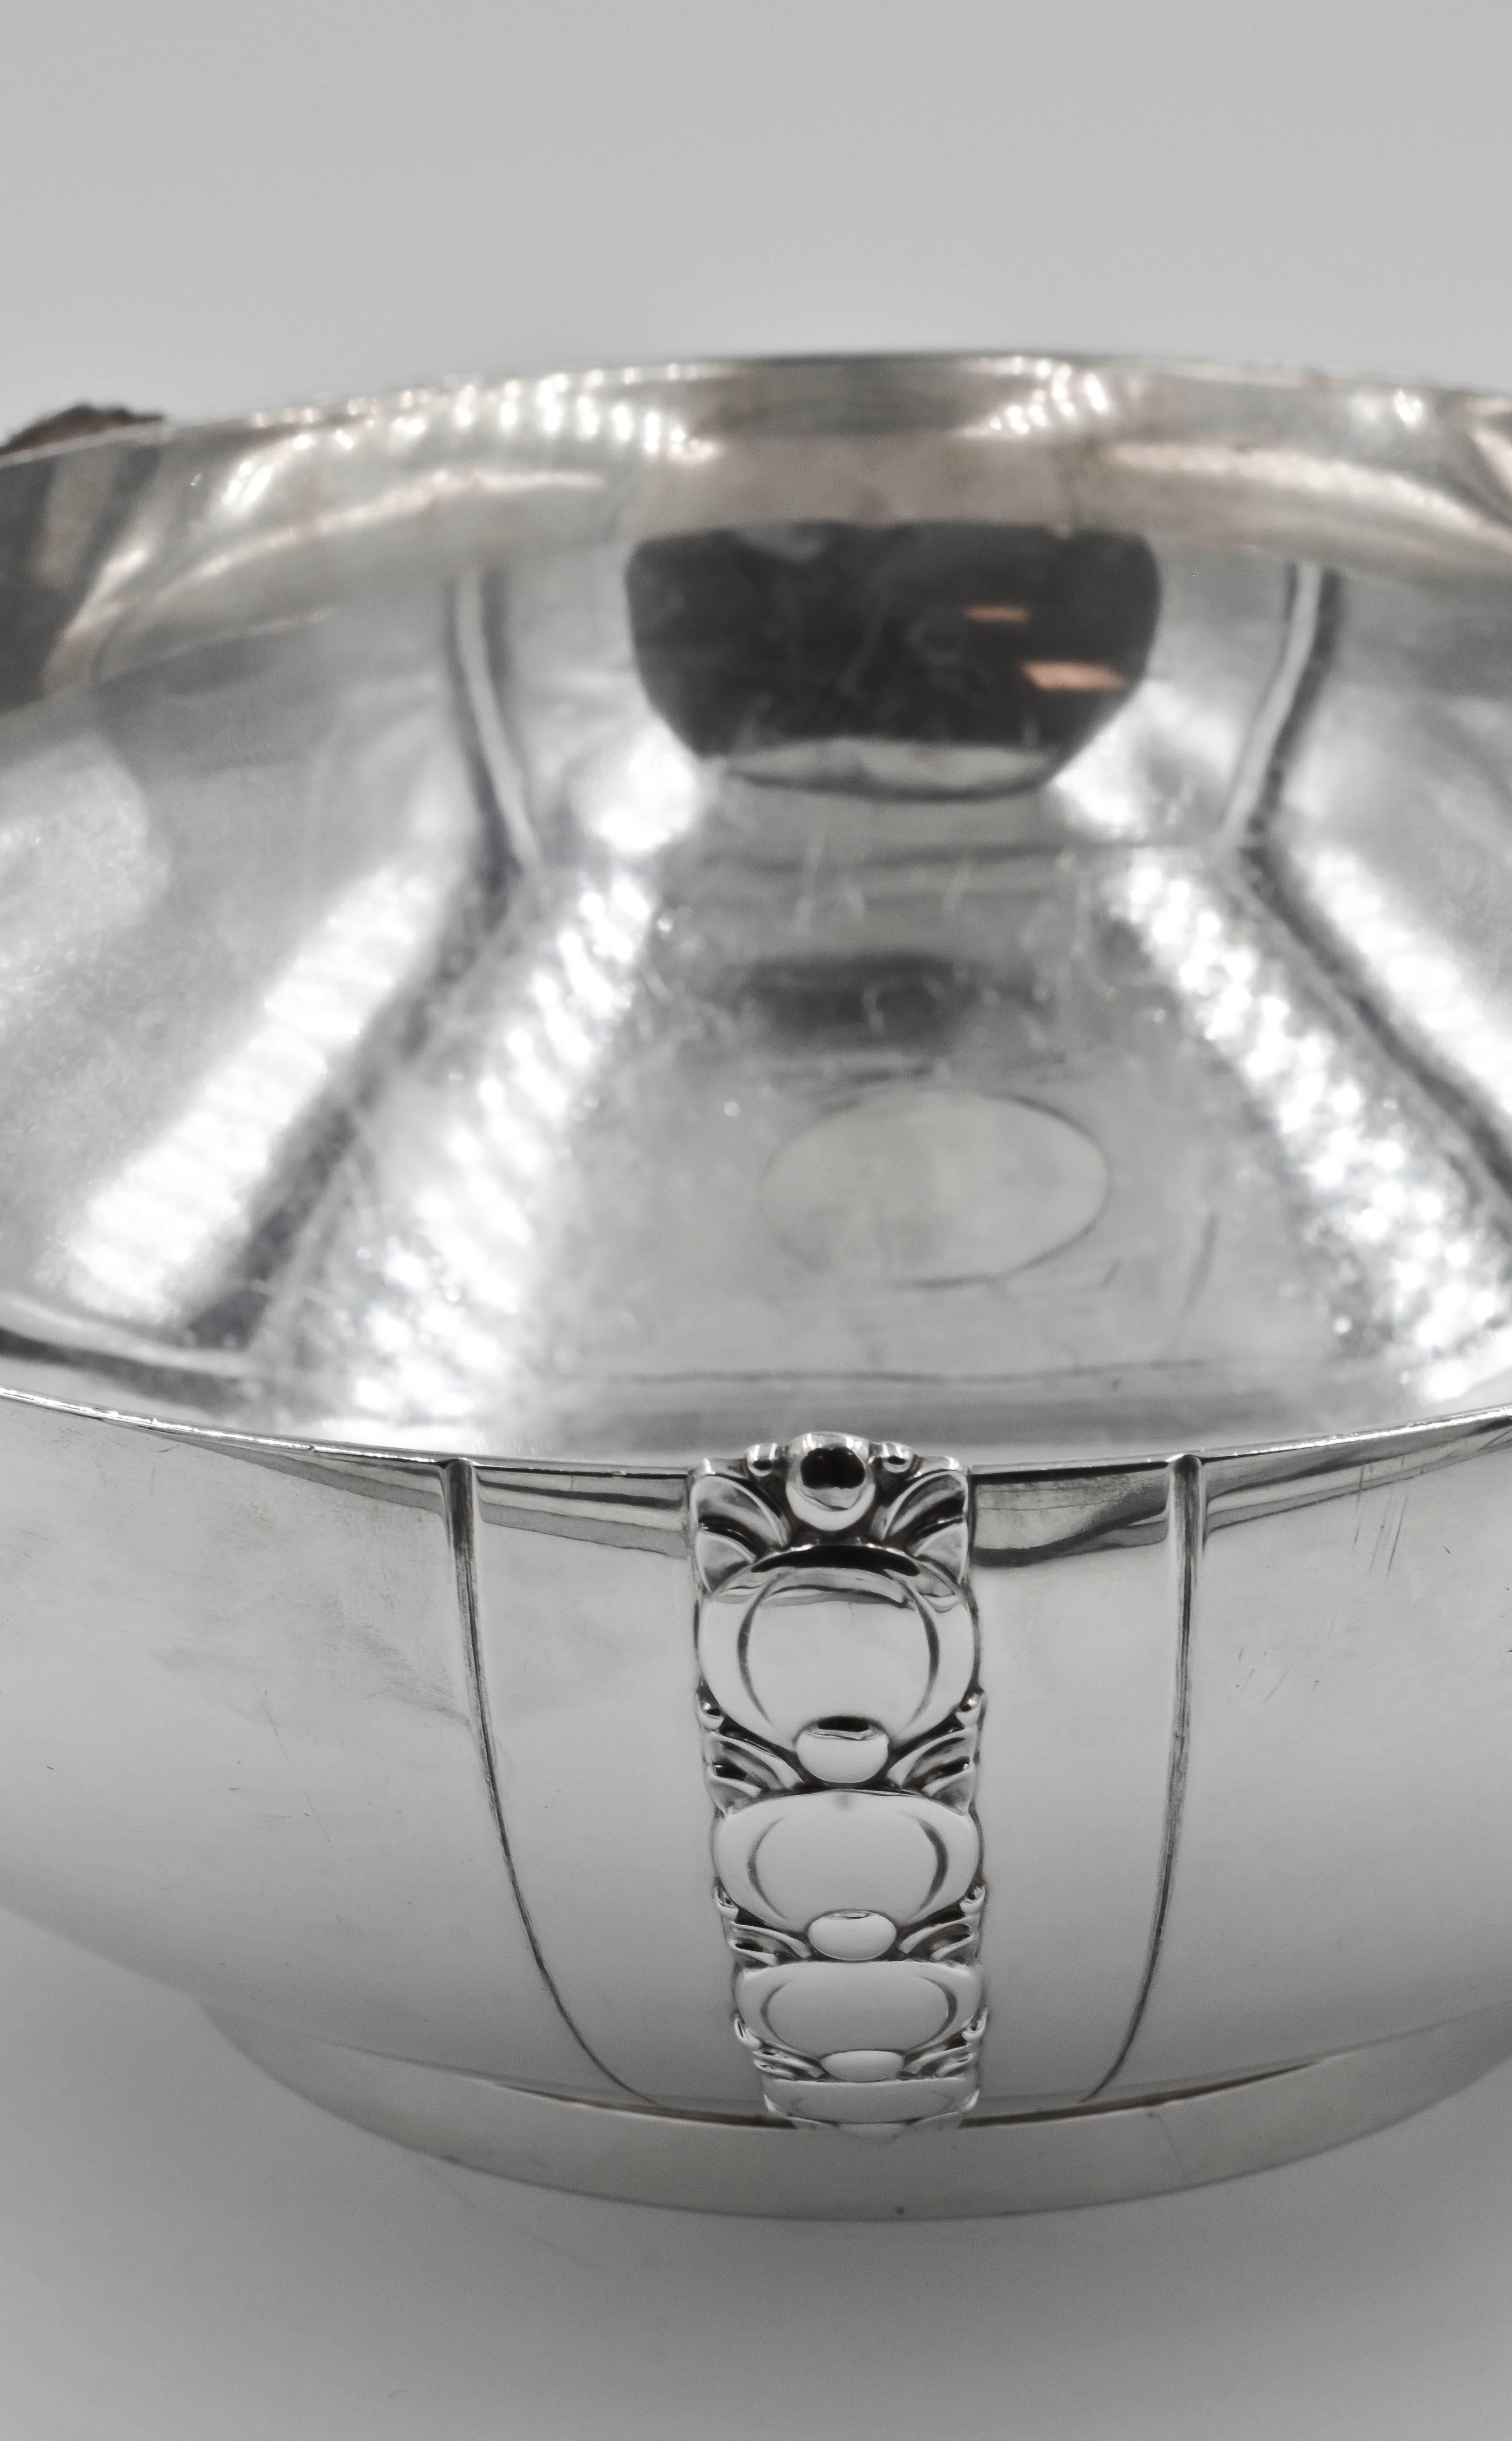 This beautiful Tiffany & Co salad bowl is a stunning Art Deco piece fashioned in shimmering American silver. Five panels alternate with narrow strips adorned with oranges to create a singular piece that hearkens back to the design Tiffany & Co